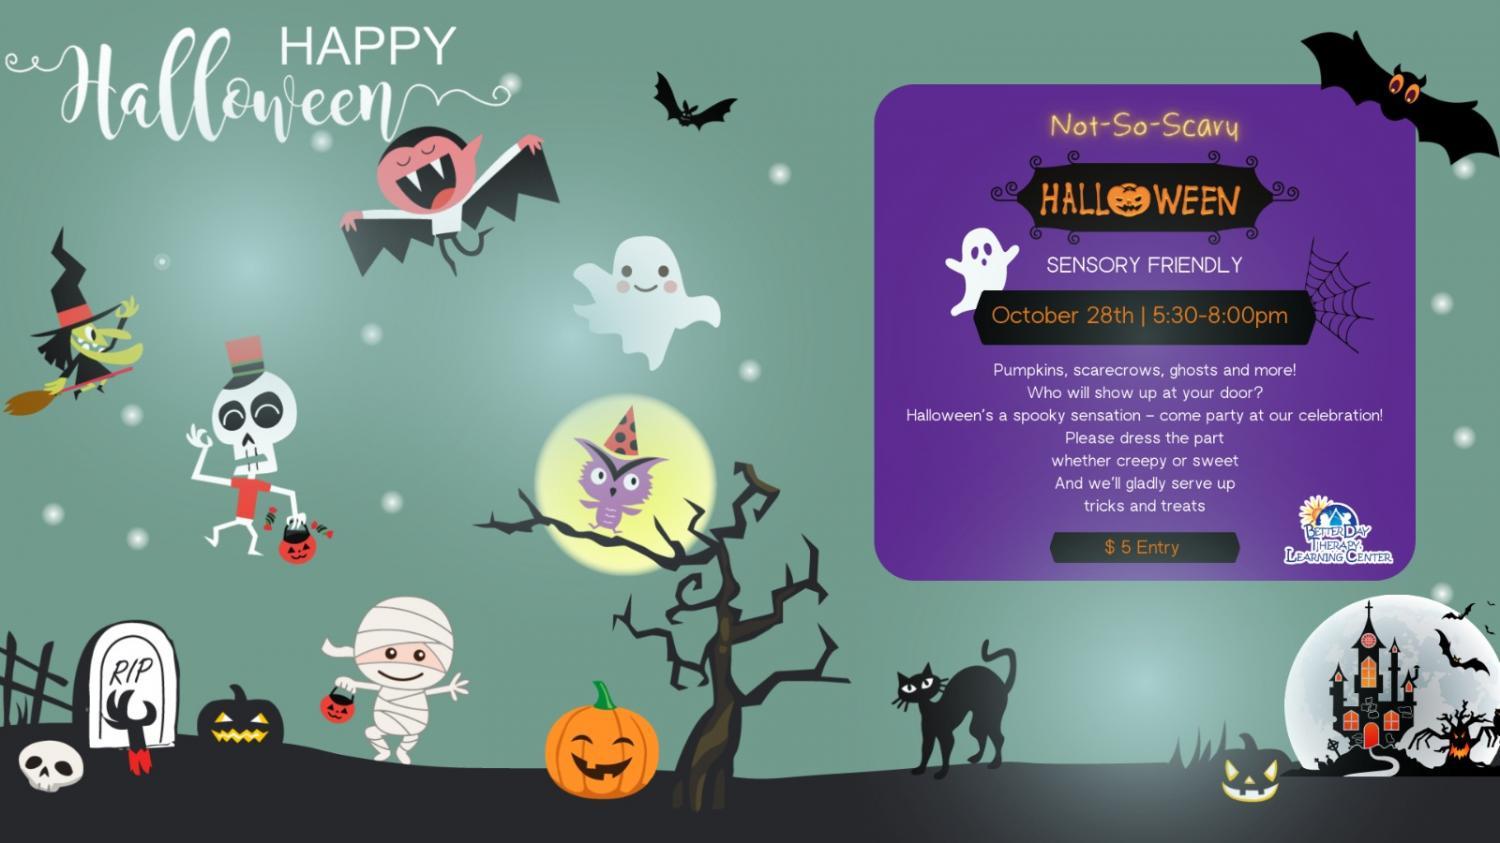 NOT-SO-SCARY HALLOWEEN PARTY ~ SENSORY FRIENDLY
Fri Oct 28, 5:30 PM - Fri Oct 28, 8:00 PM
in 9 days